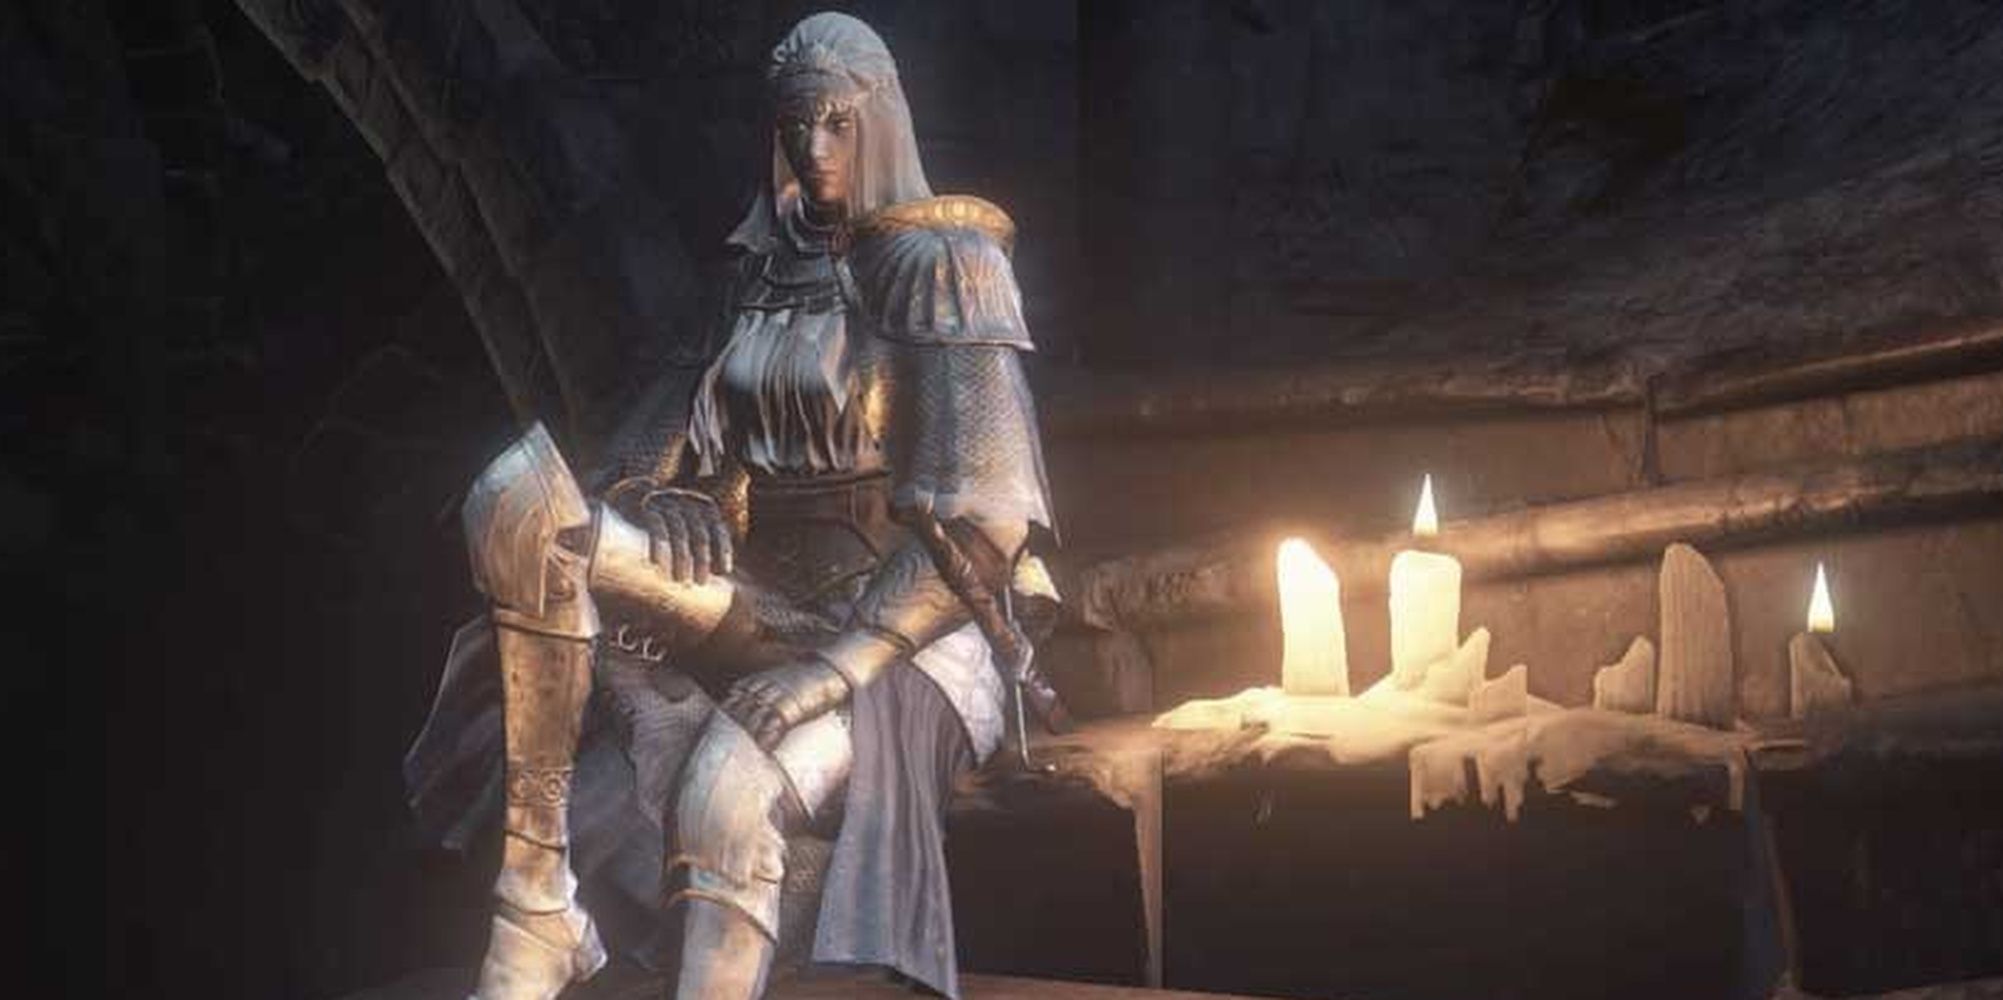 Sirris is sitting at Firelink's shrine, waiting for a battle